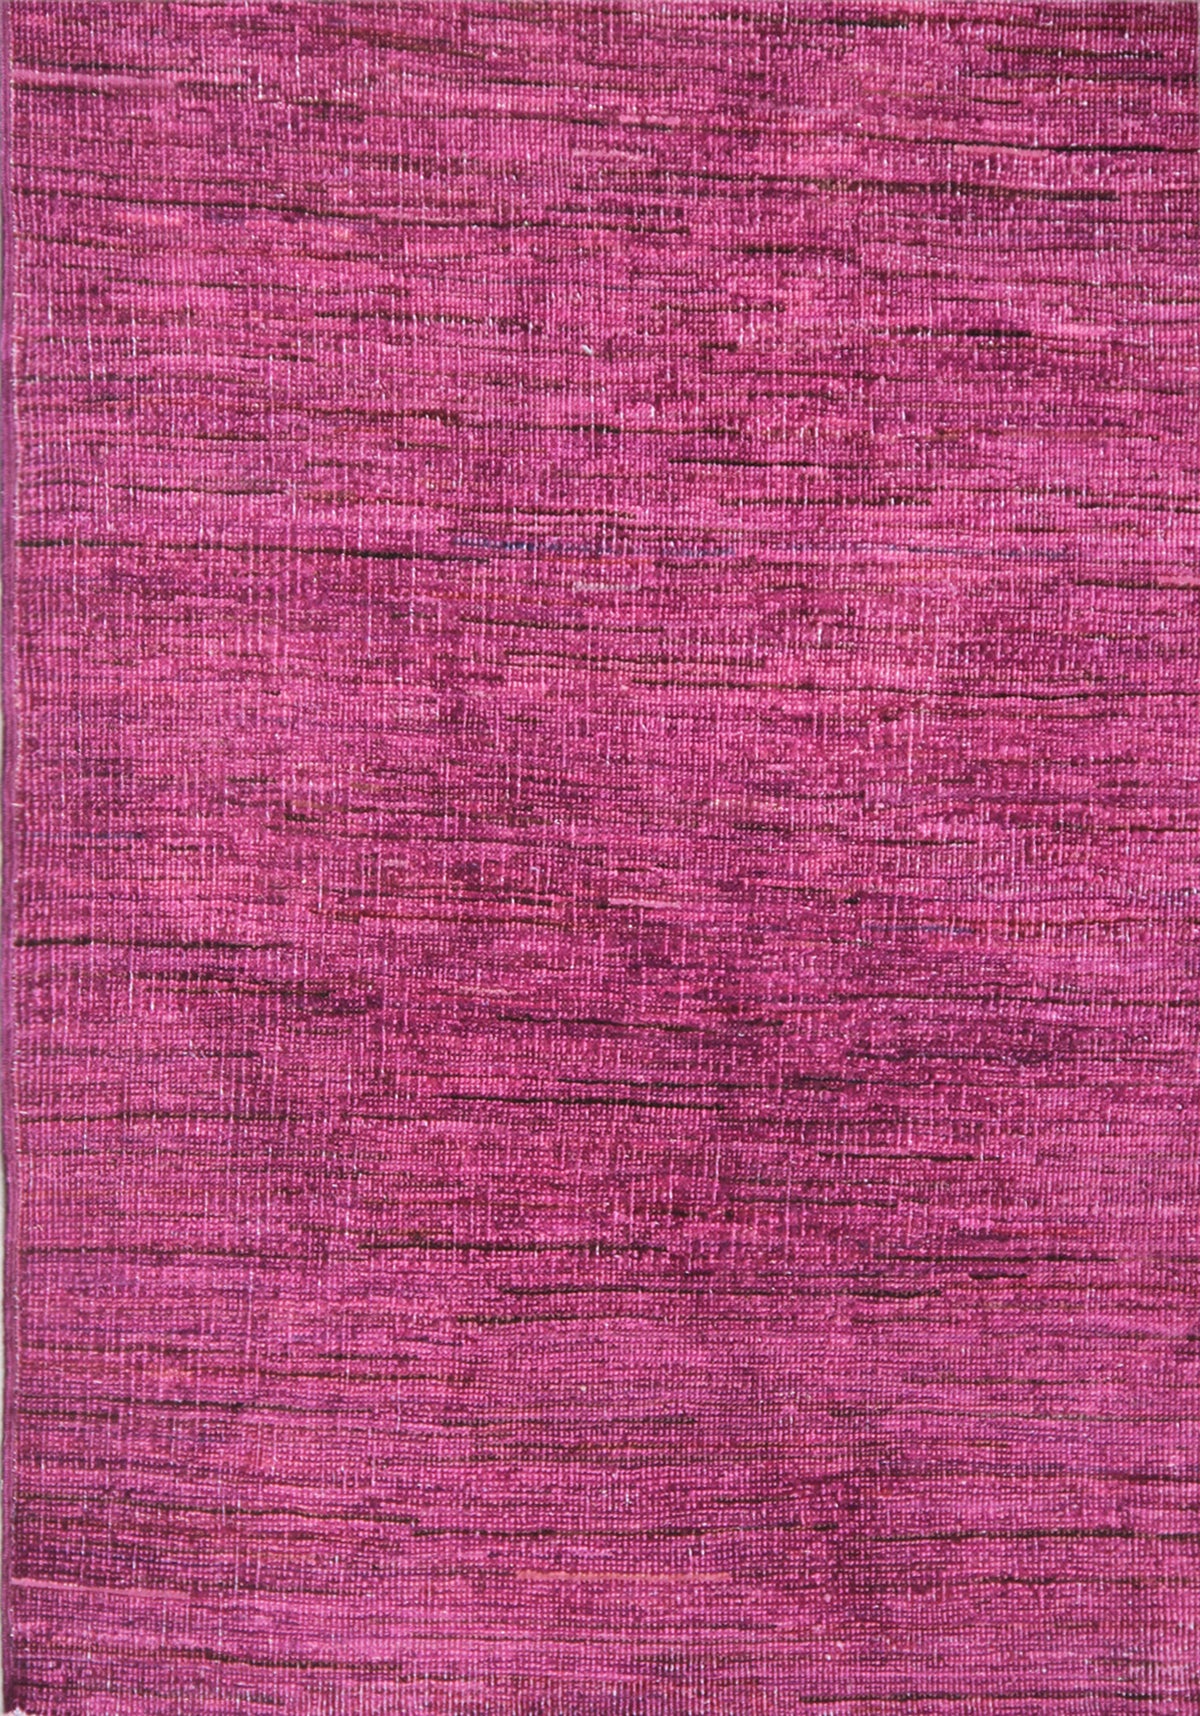 9.06 x  6.06 Solid Plain Hot Pink Hand-Knotted Ariana Overdye Area Rug